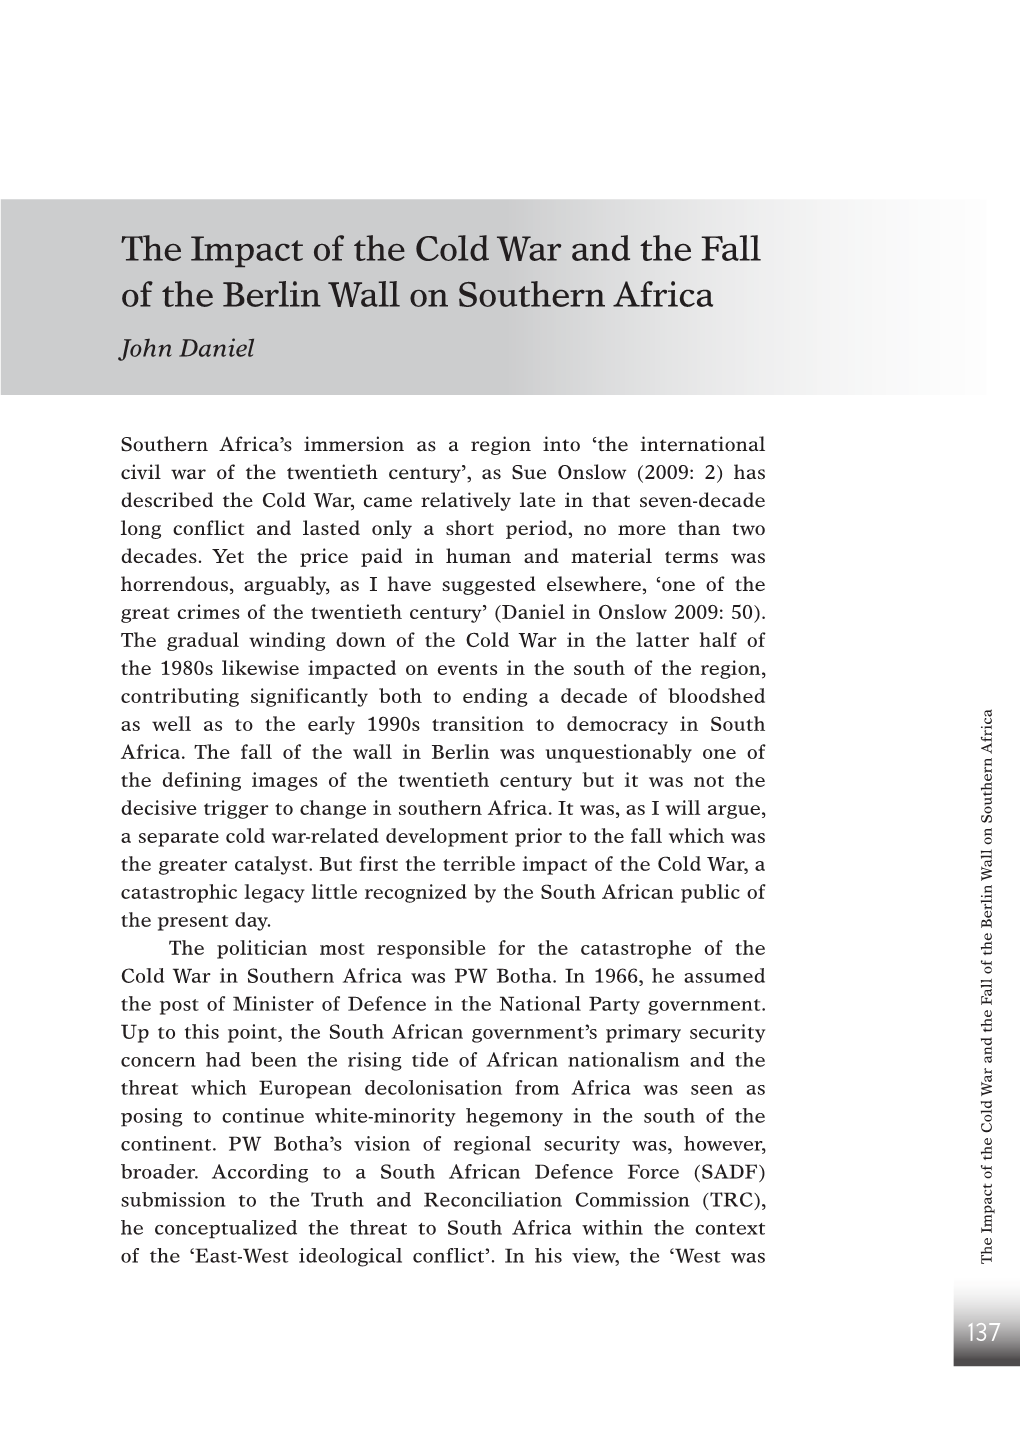 The Impact of the Cold War and the Fall of the Berlin Wall on Southern Africa John Daniel